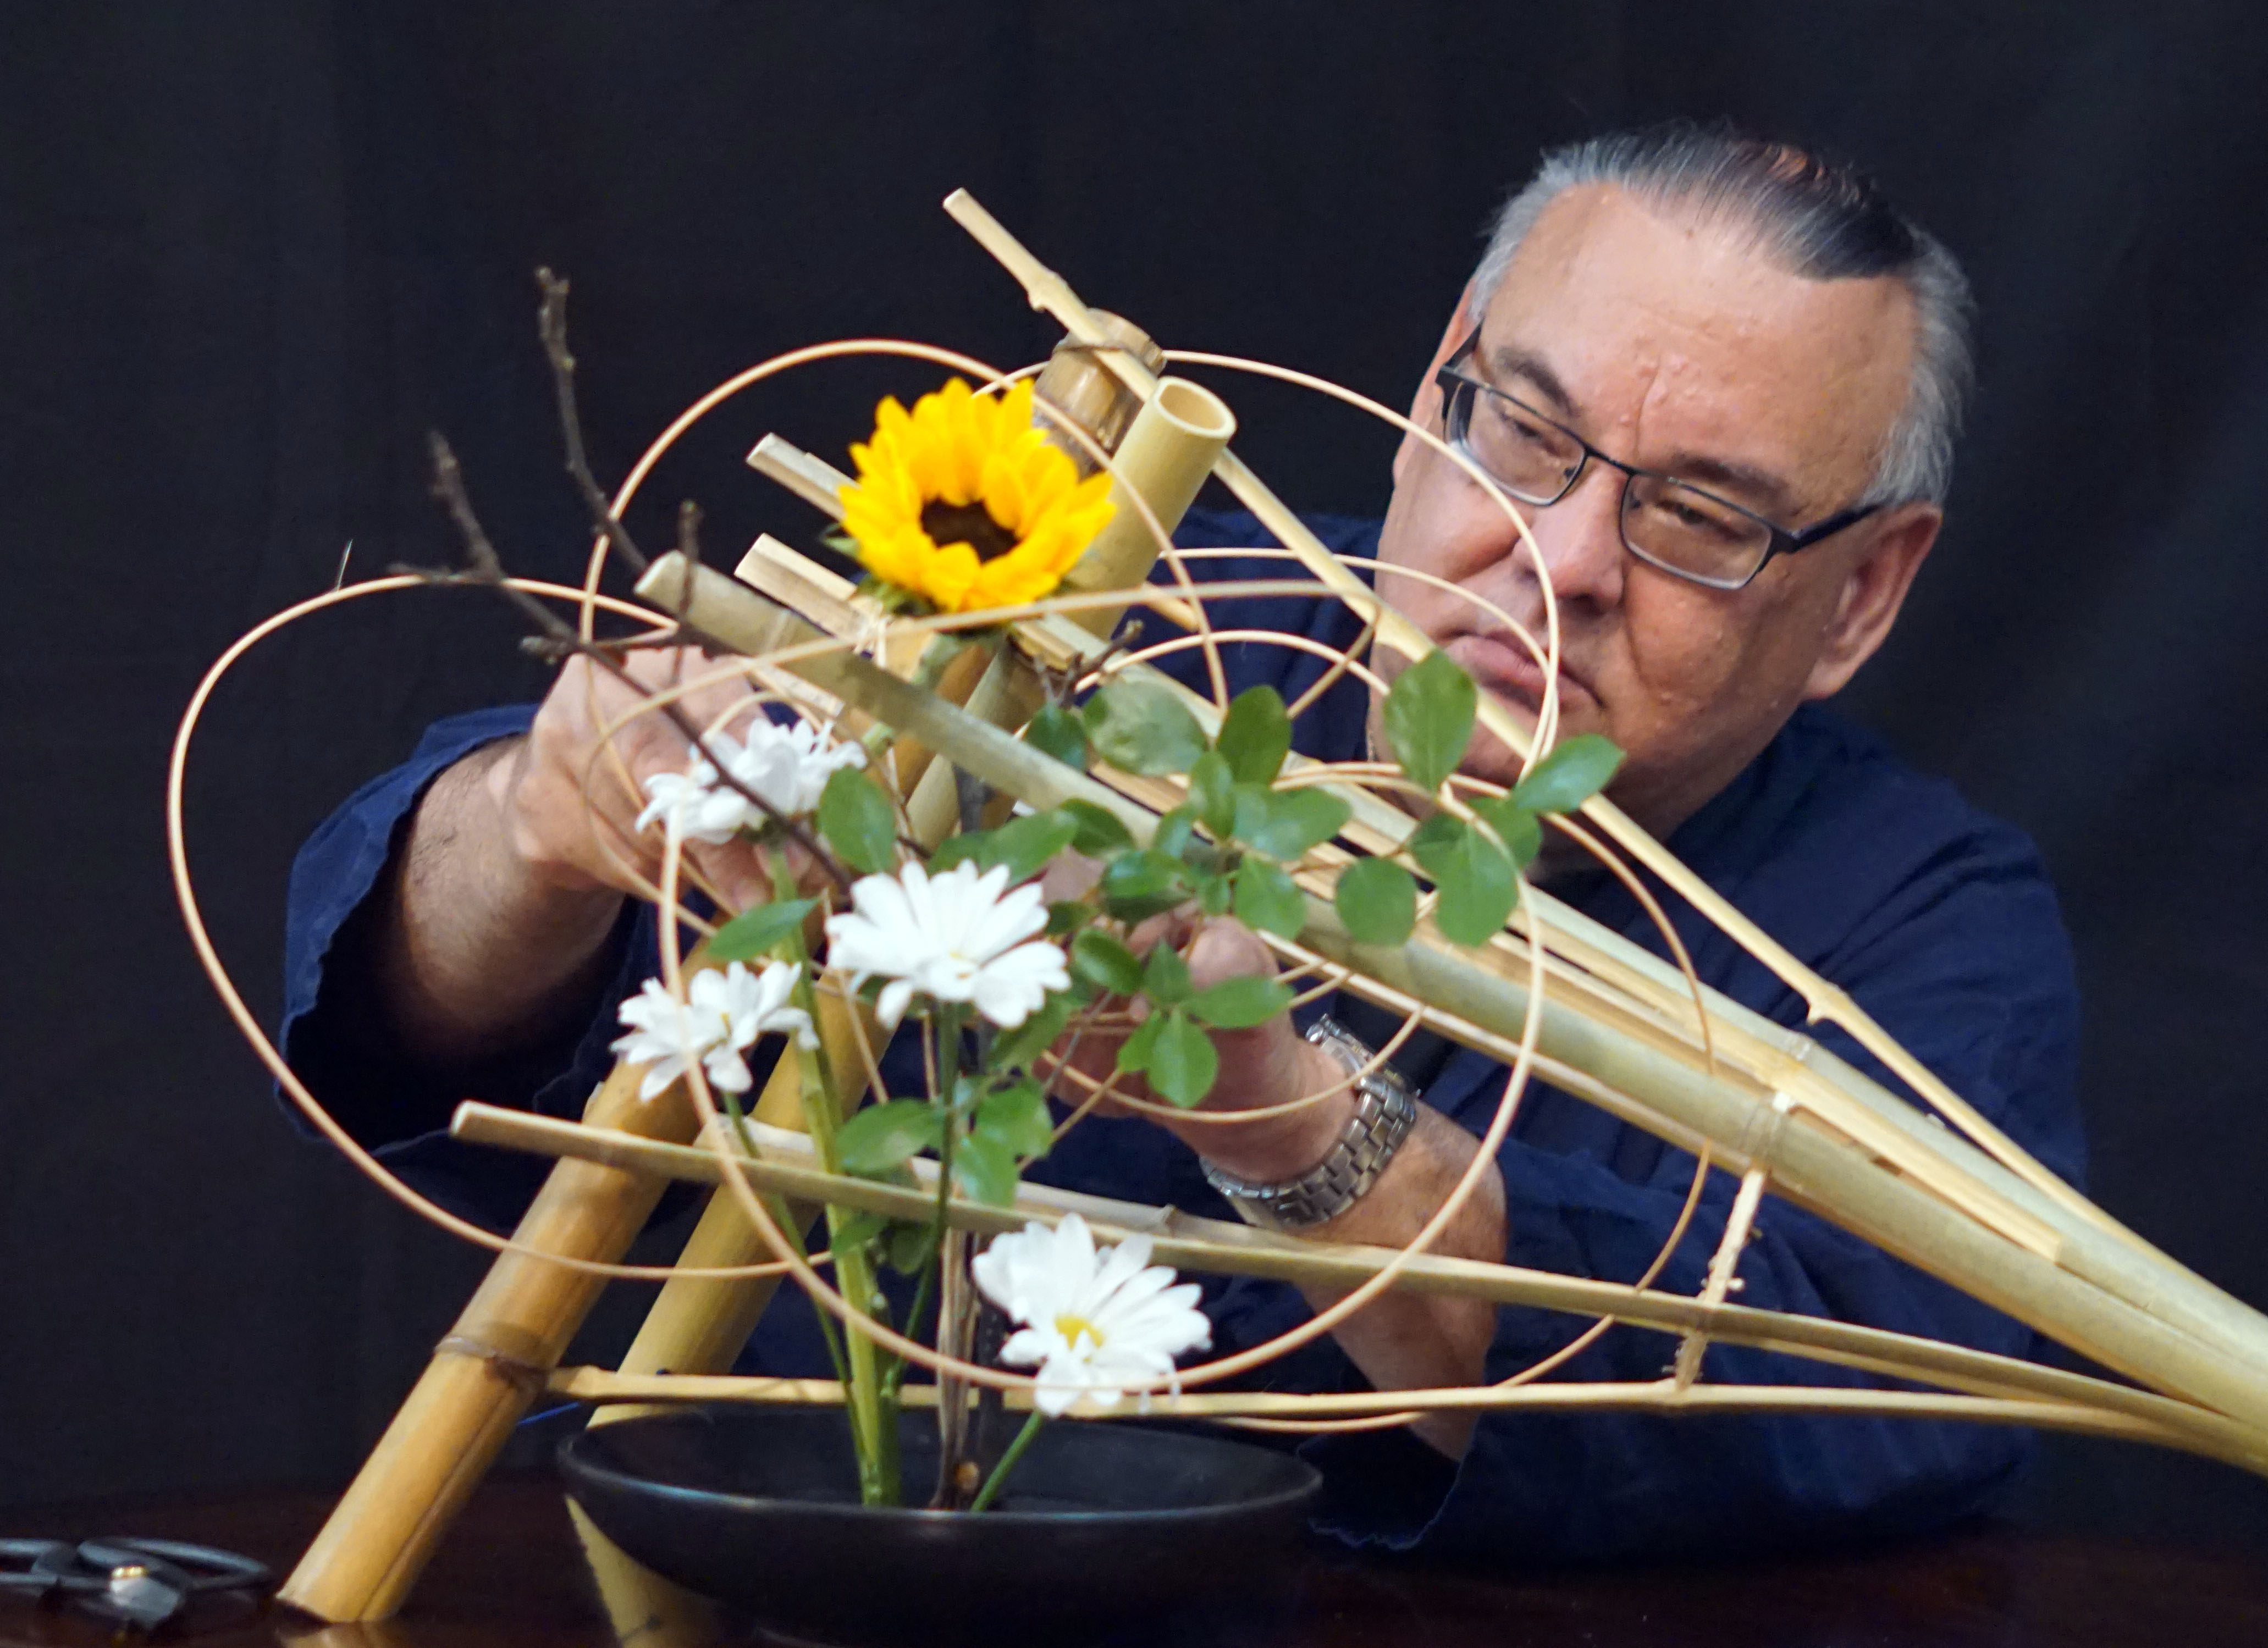 John Spence learned ikebana arranging from his mother, Kikue, whose name means chrysanthemum in Japanese. Ikebana may be accomplished by taking a familiar plant or flower and presenting it in a new way. Unnecessary elements are eliminated, possibly a petal, leaf, or stem.